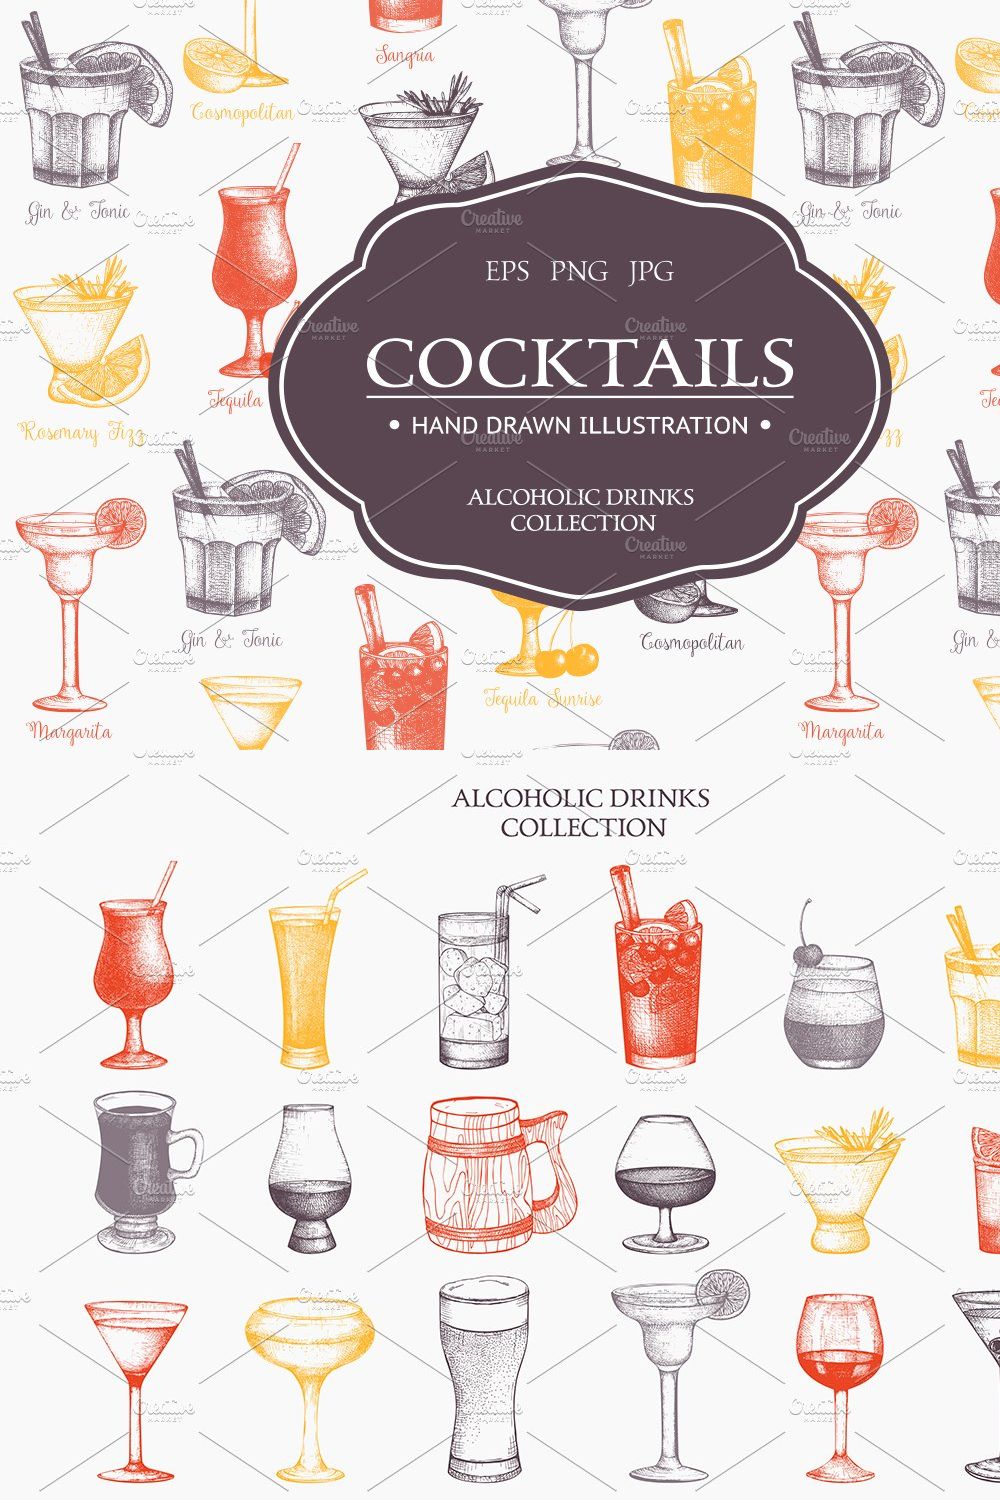 Alcoholic drinks vector sketches pinterest preview image.